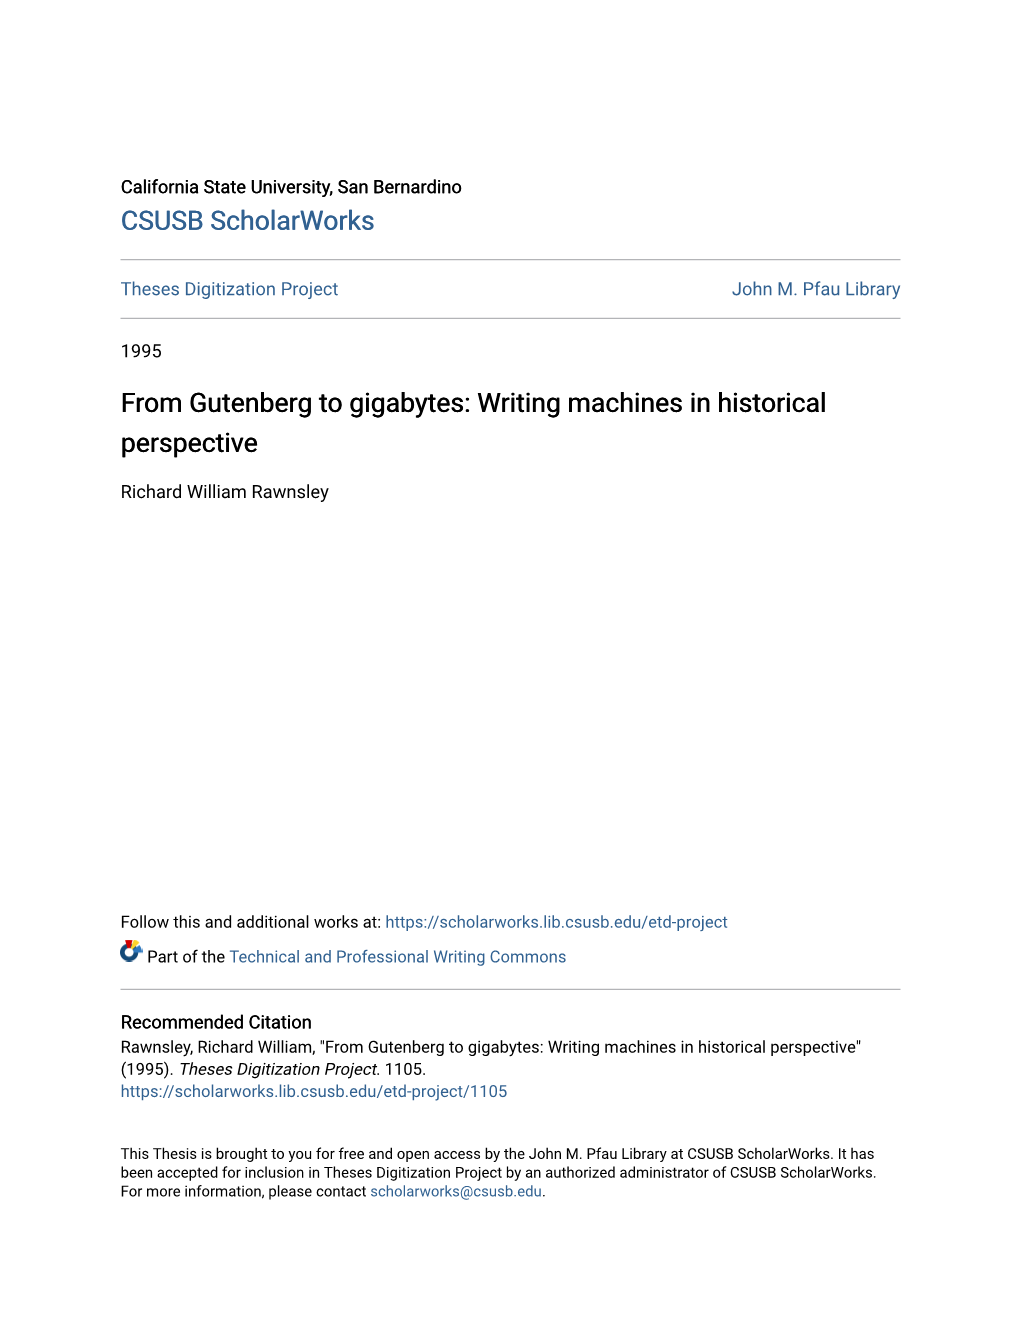 From Gutenberg to Gigabytes: Writing Machines in Historical Perspective